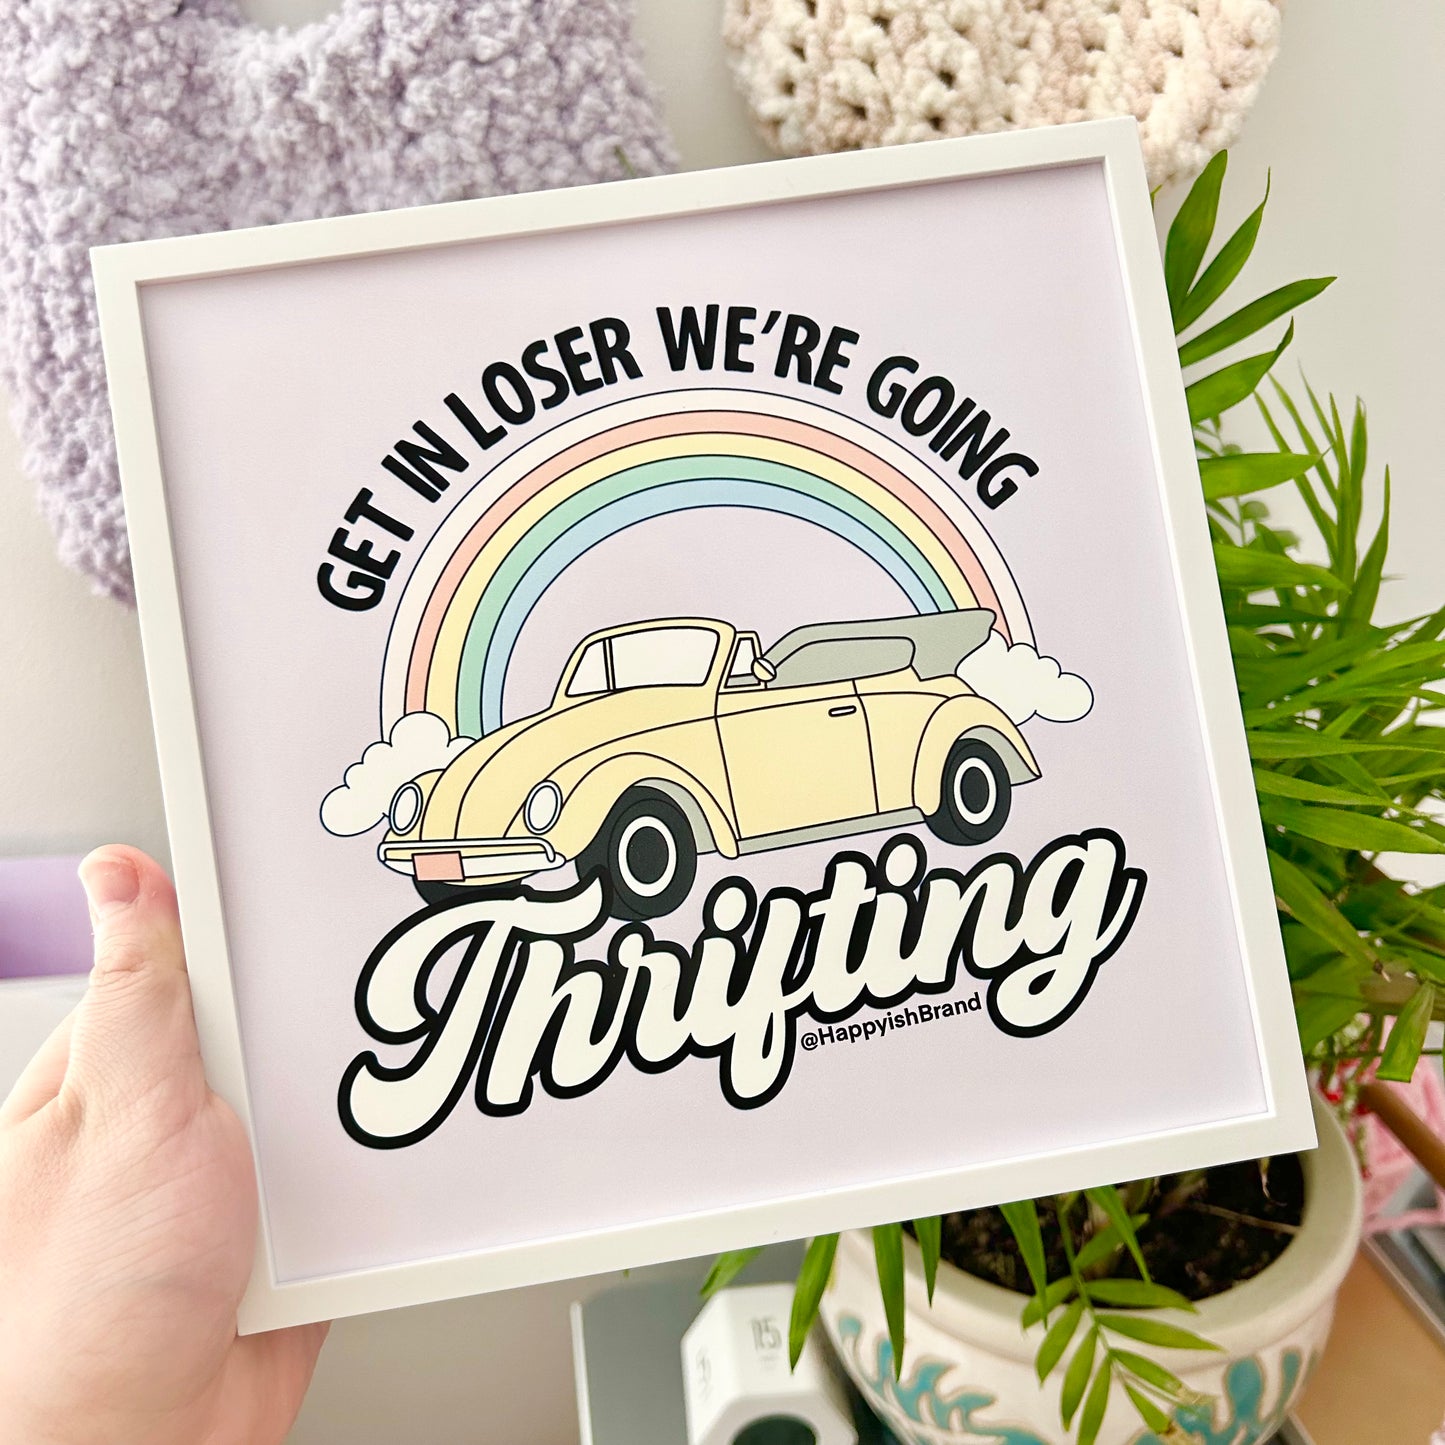 Get in Loser We're Going Thrifting 8x8 Inch Art Print